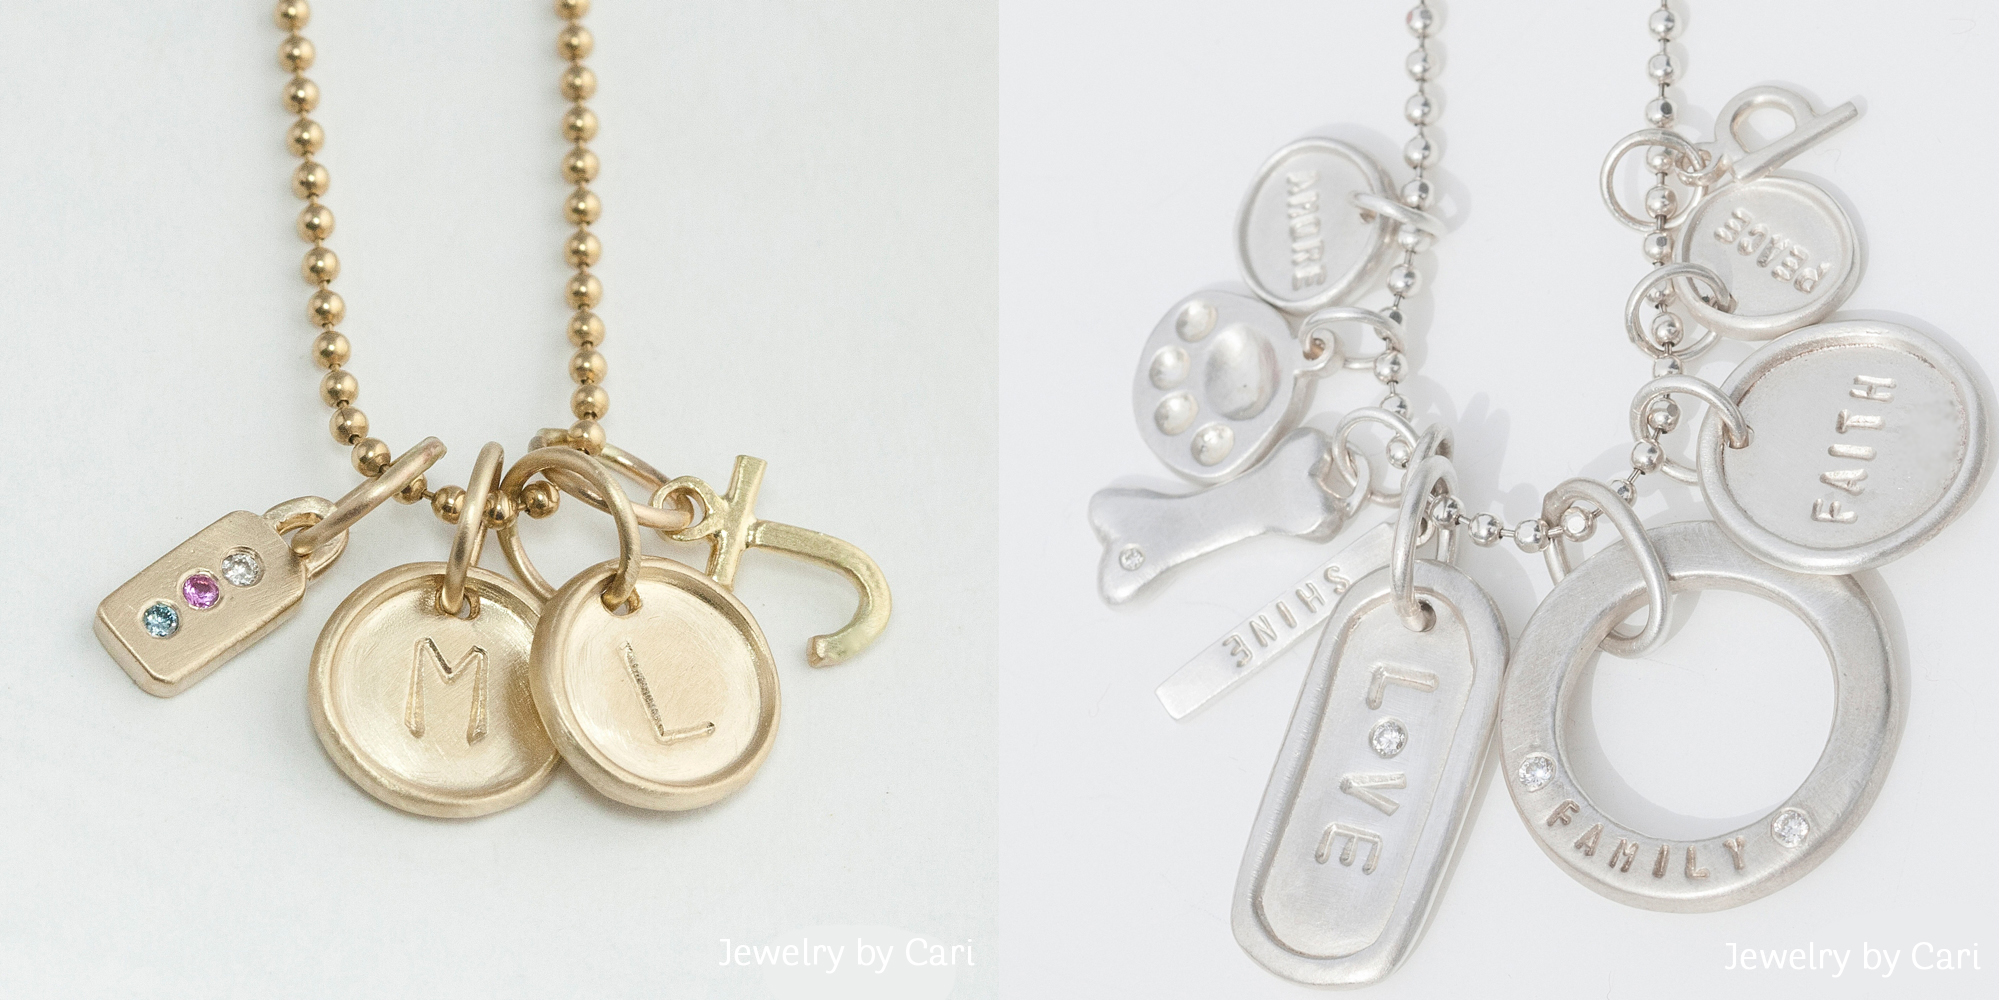 How to Match Your Jewelry Chain to Charms